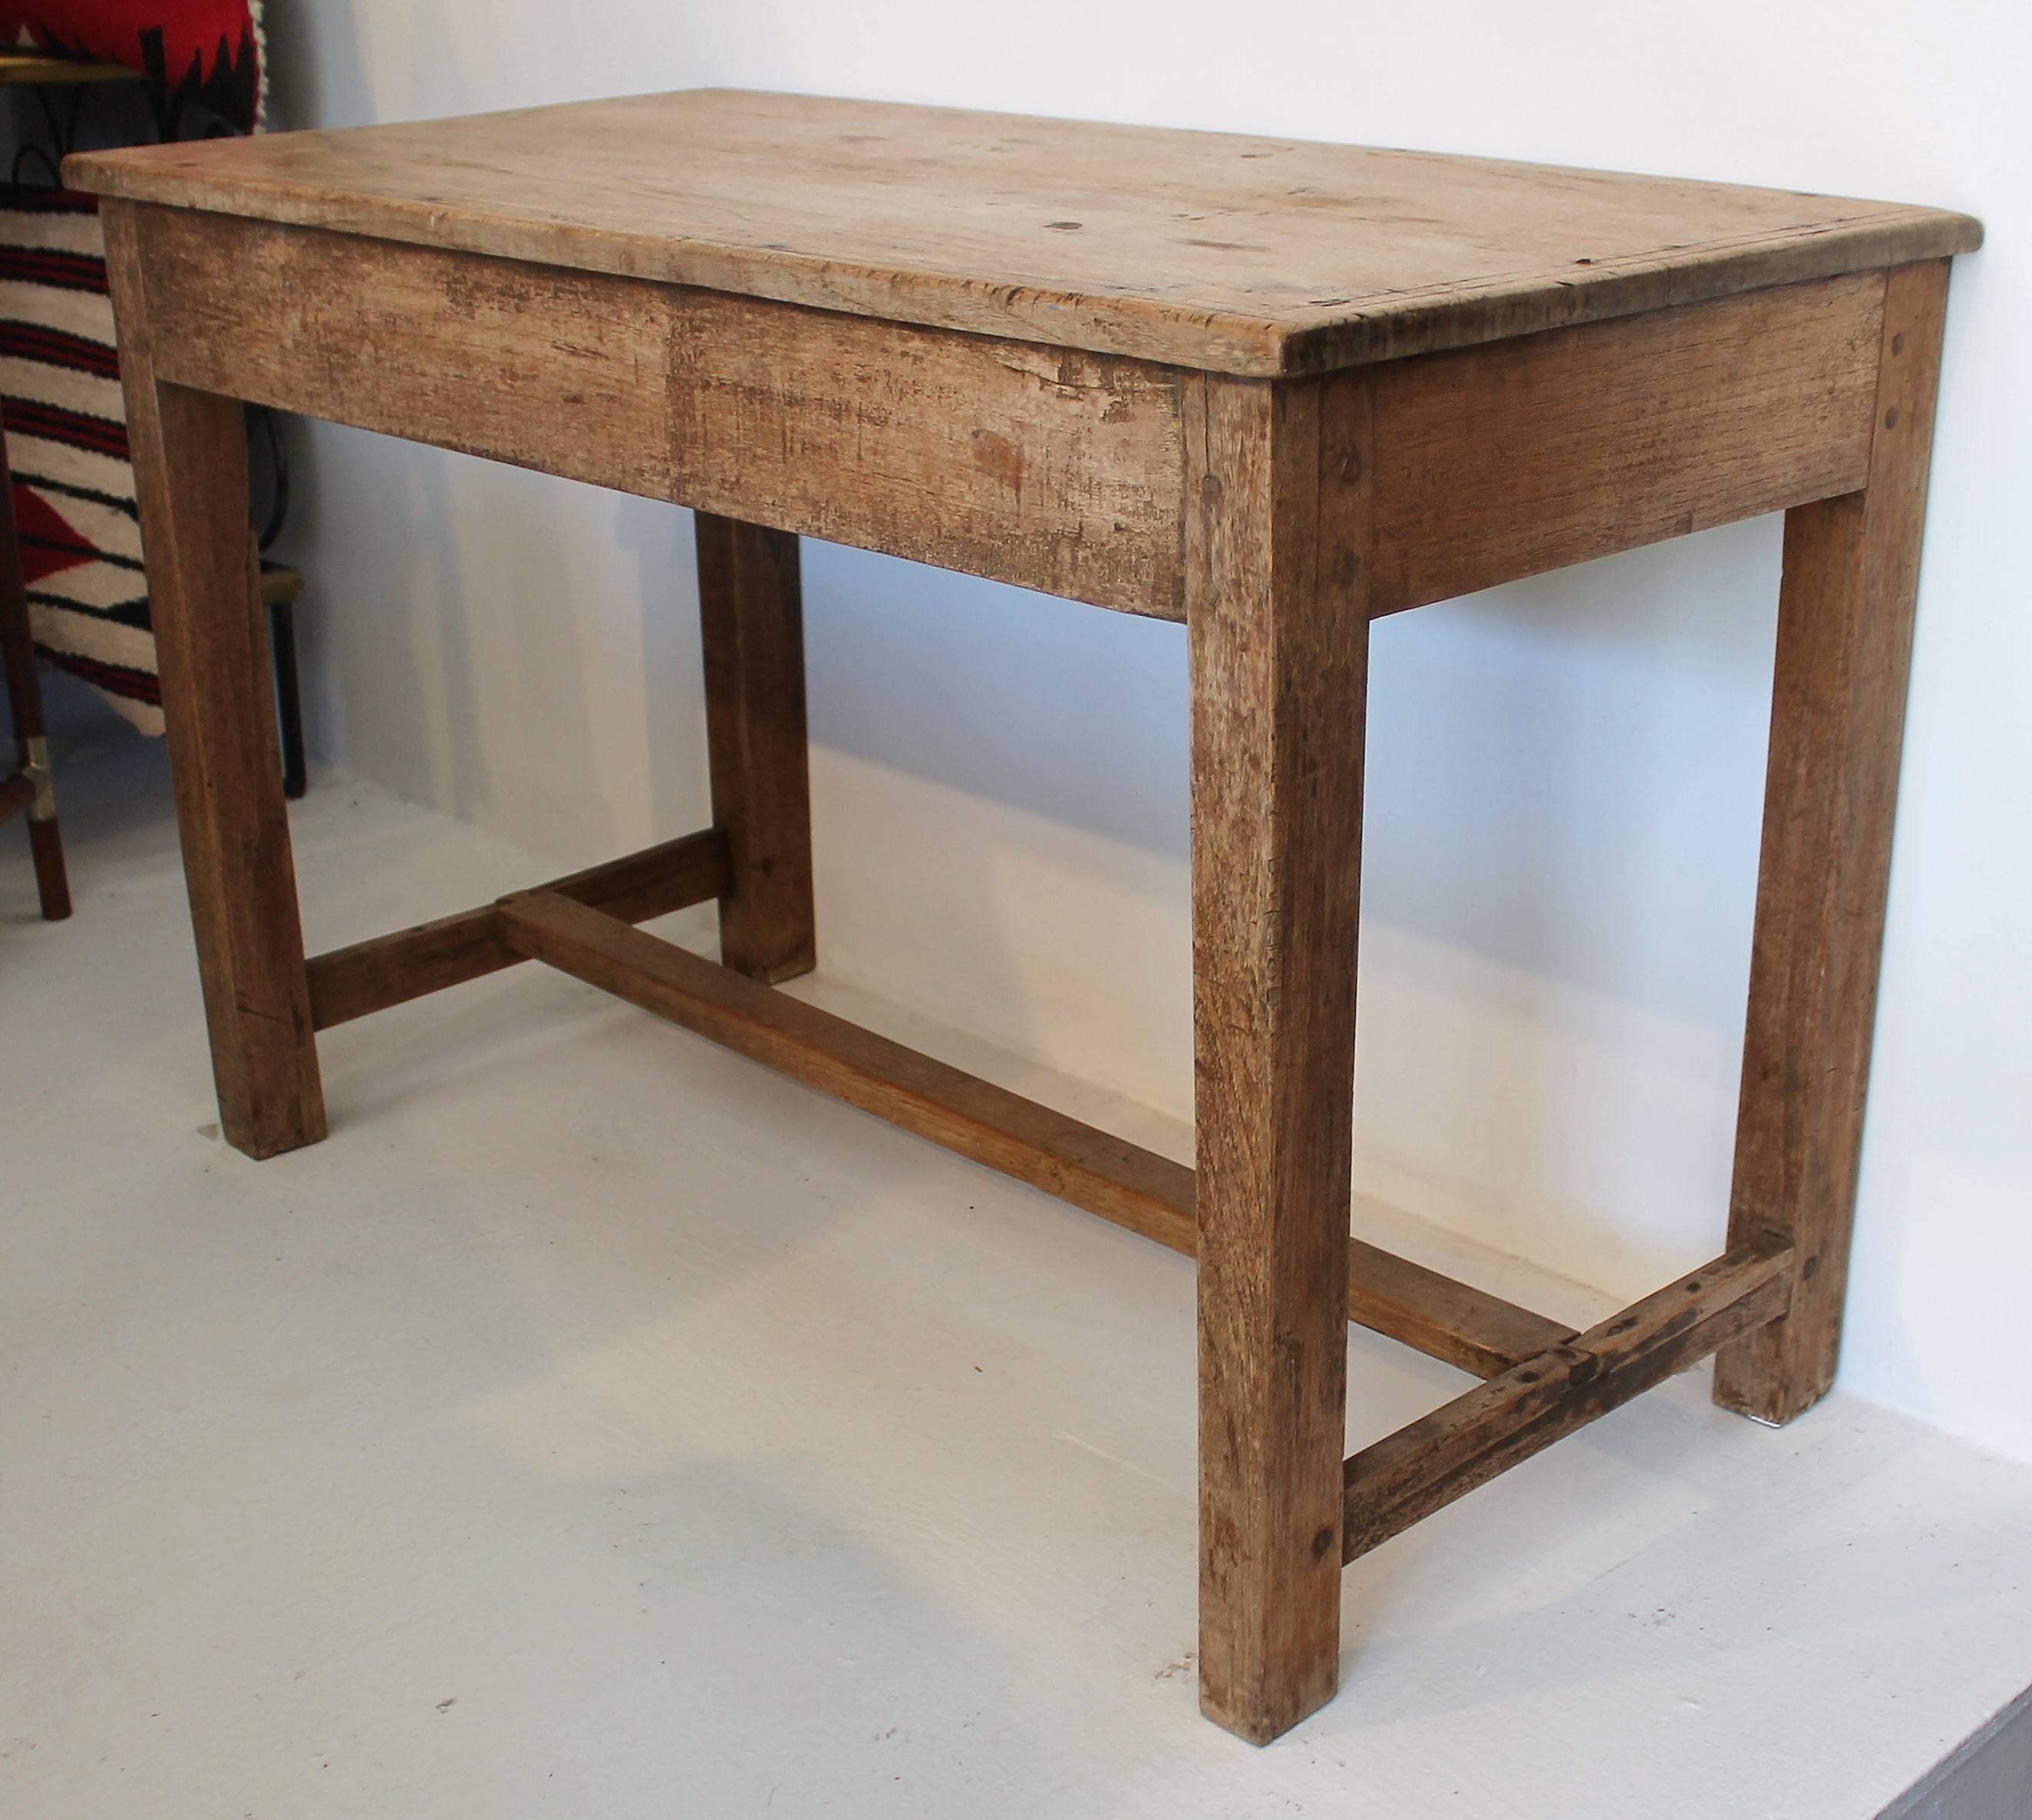 This early and rustic walnut side table is in good condition and very sturdy. The construction is wood pegs and early cut handmade nails. The centre stretcher is dovetailed in. This is a very early handmade table.